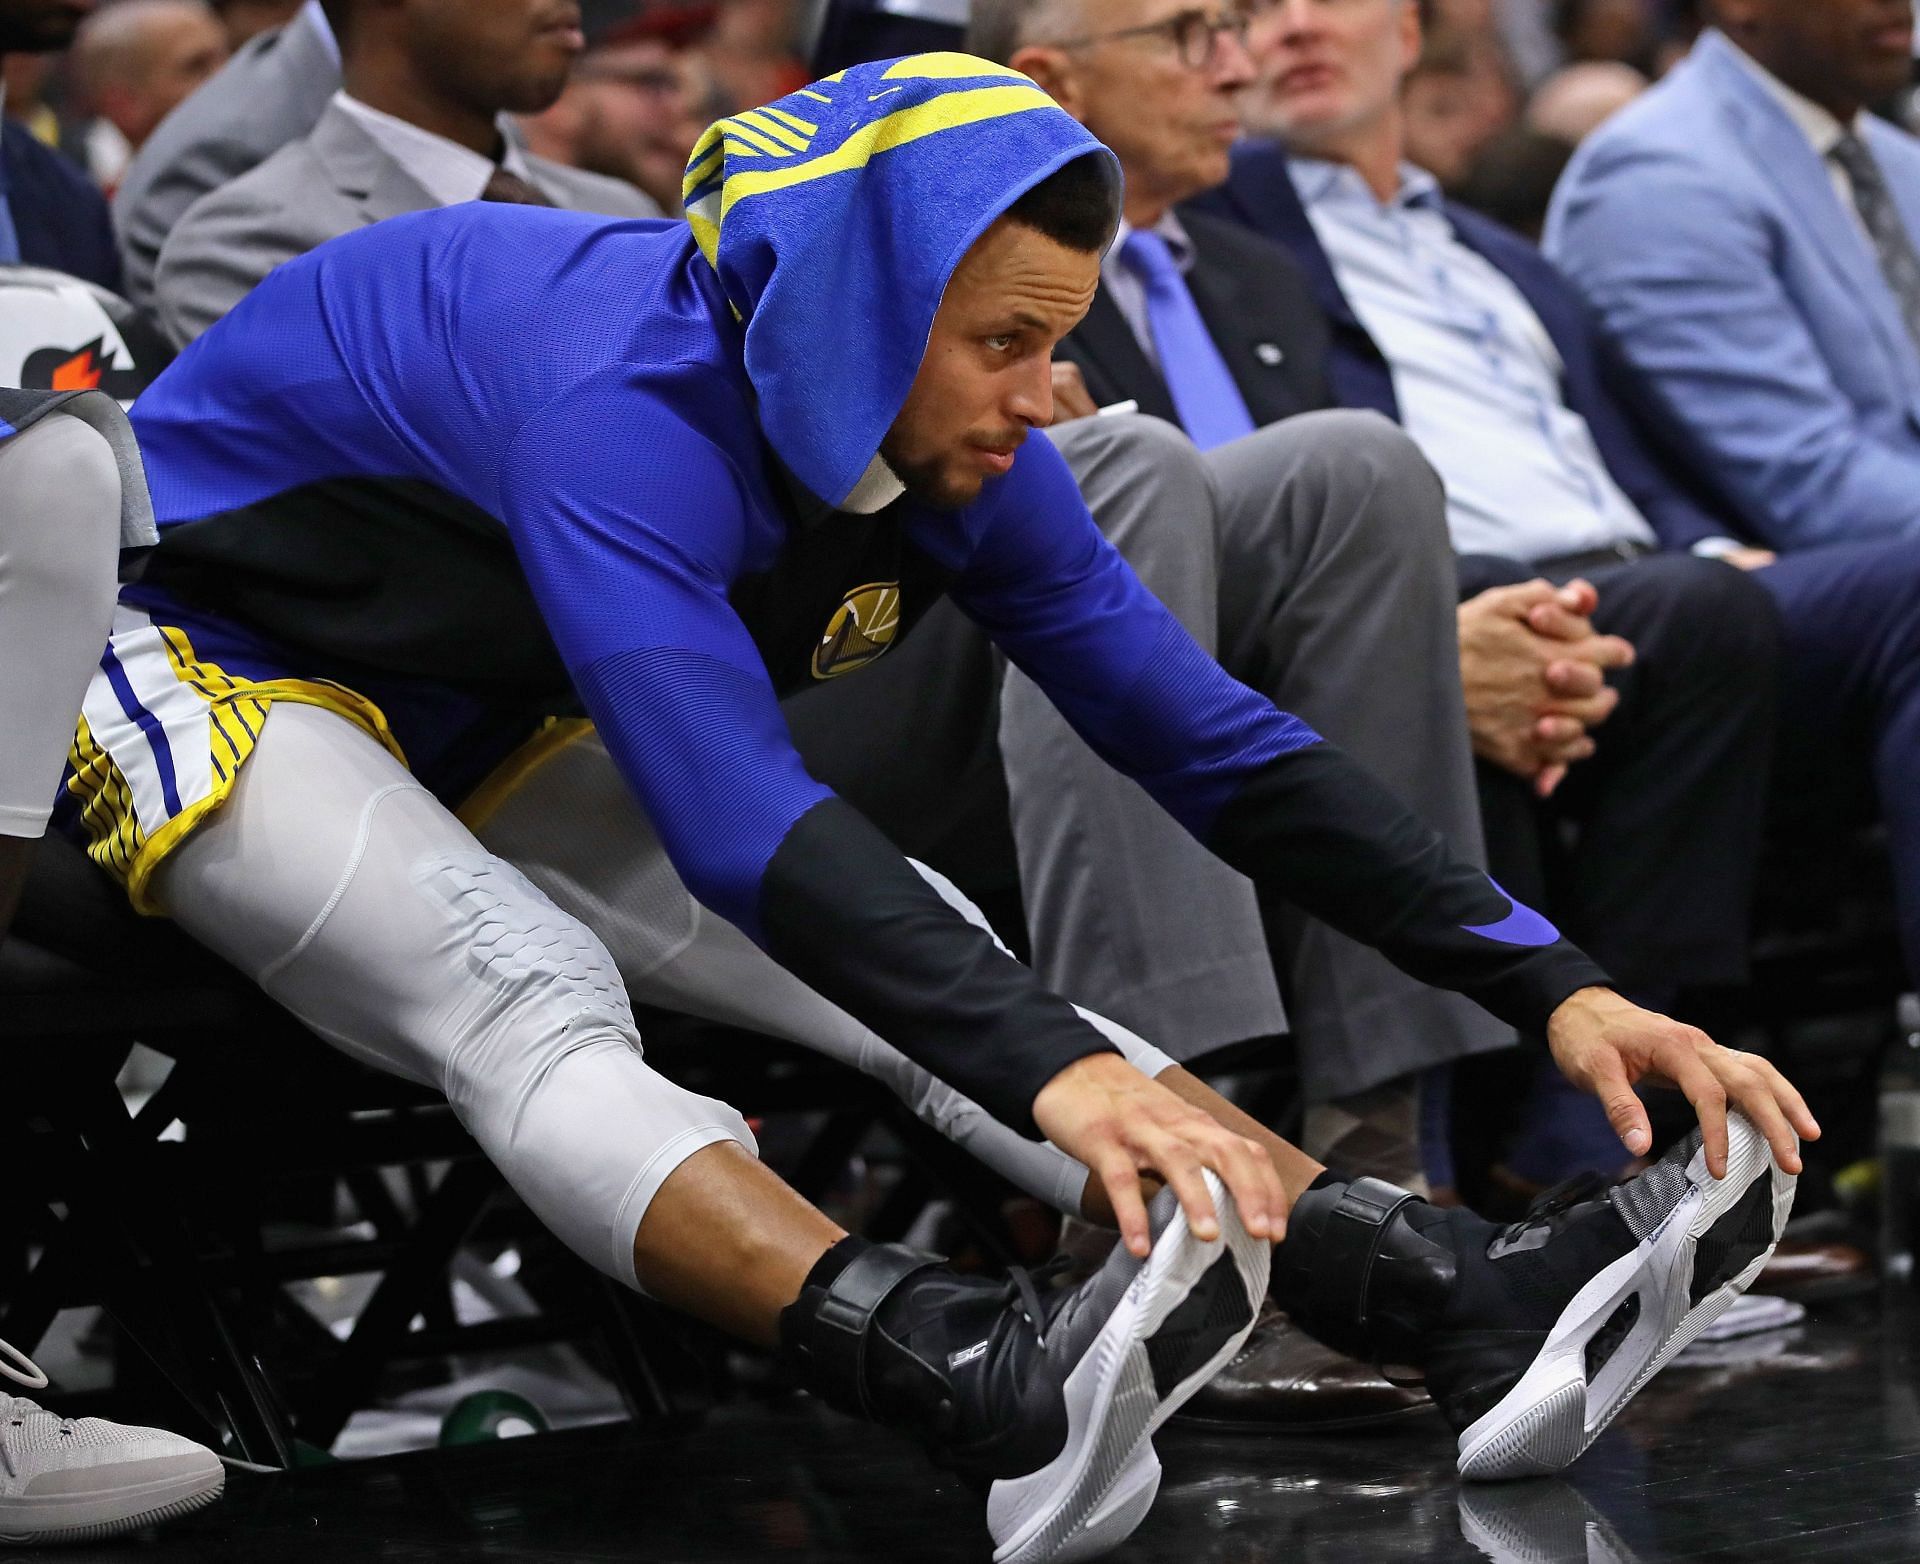 Steph Curry of the Golden State Warriors stretches on the bench in 2018